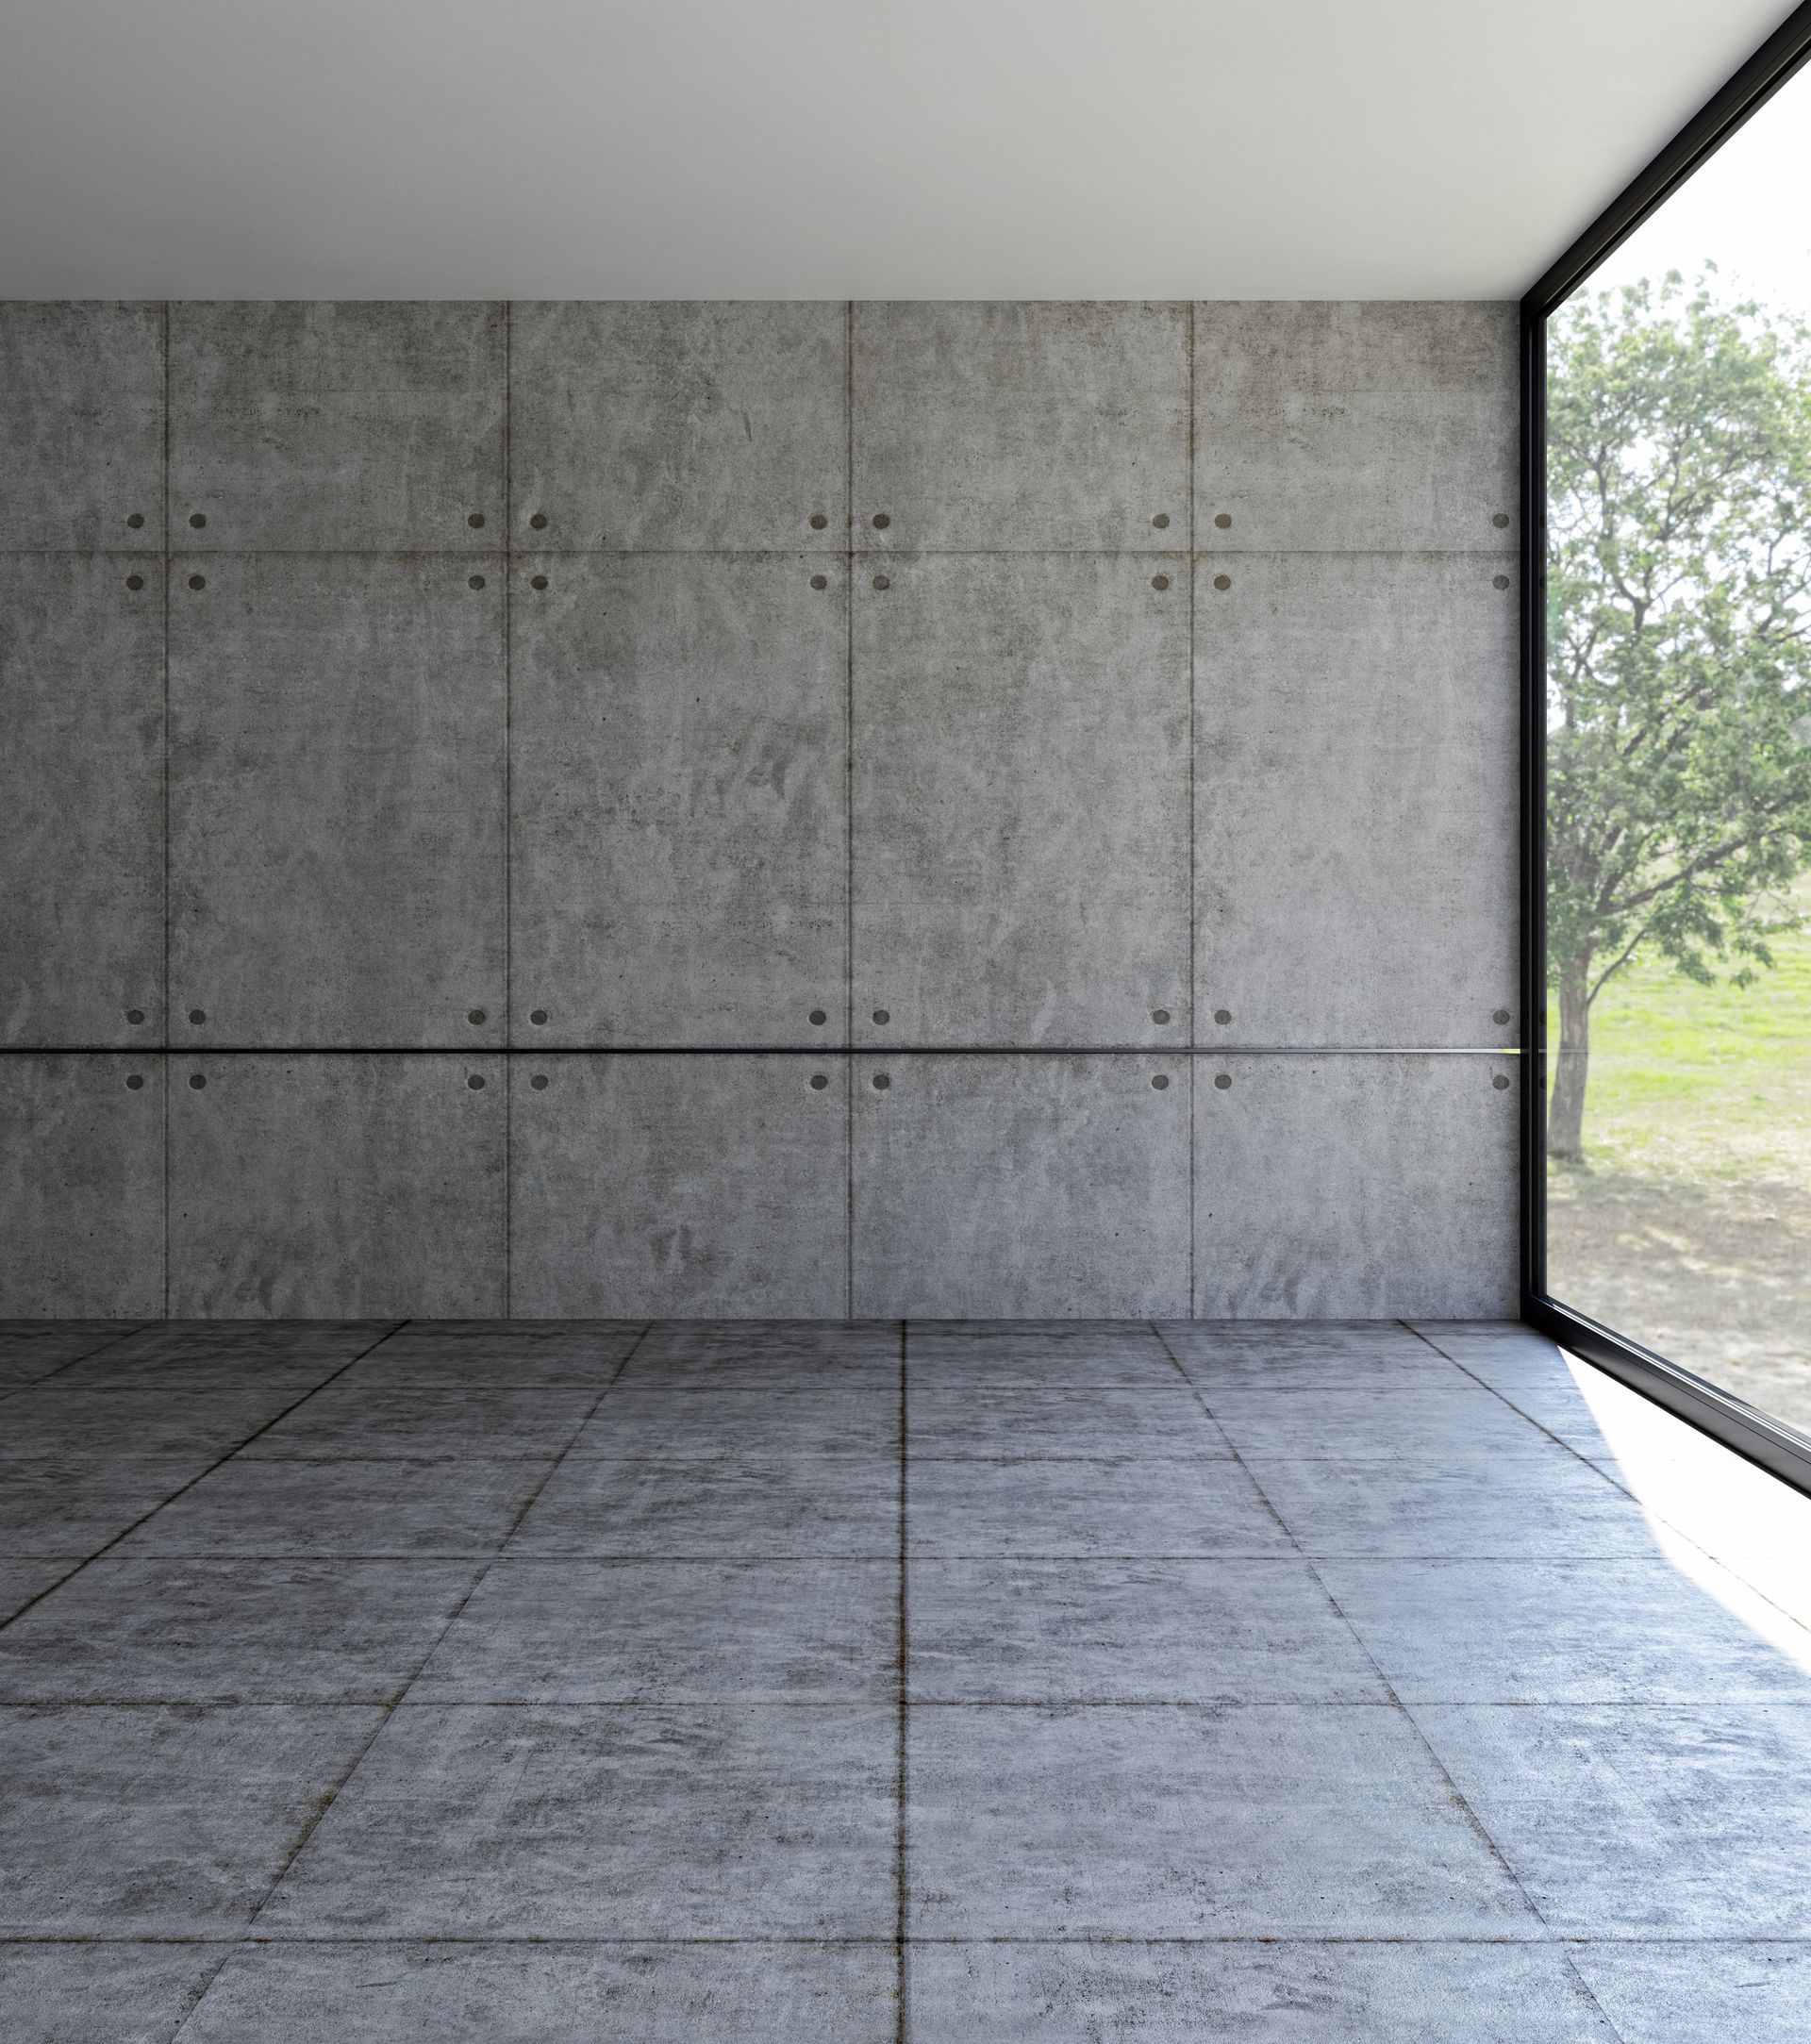 An empty room with concrete walls and a large window.